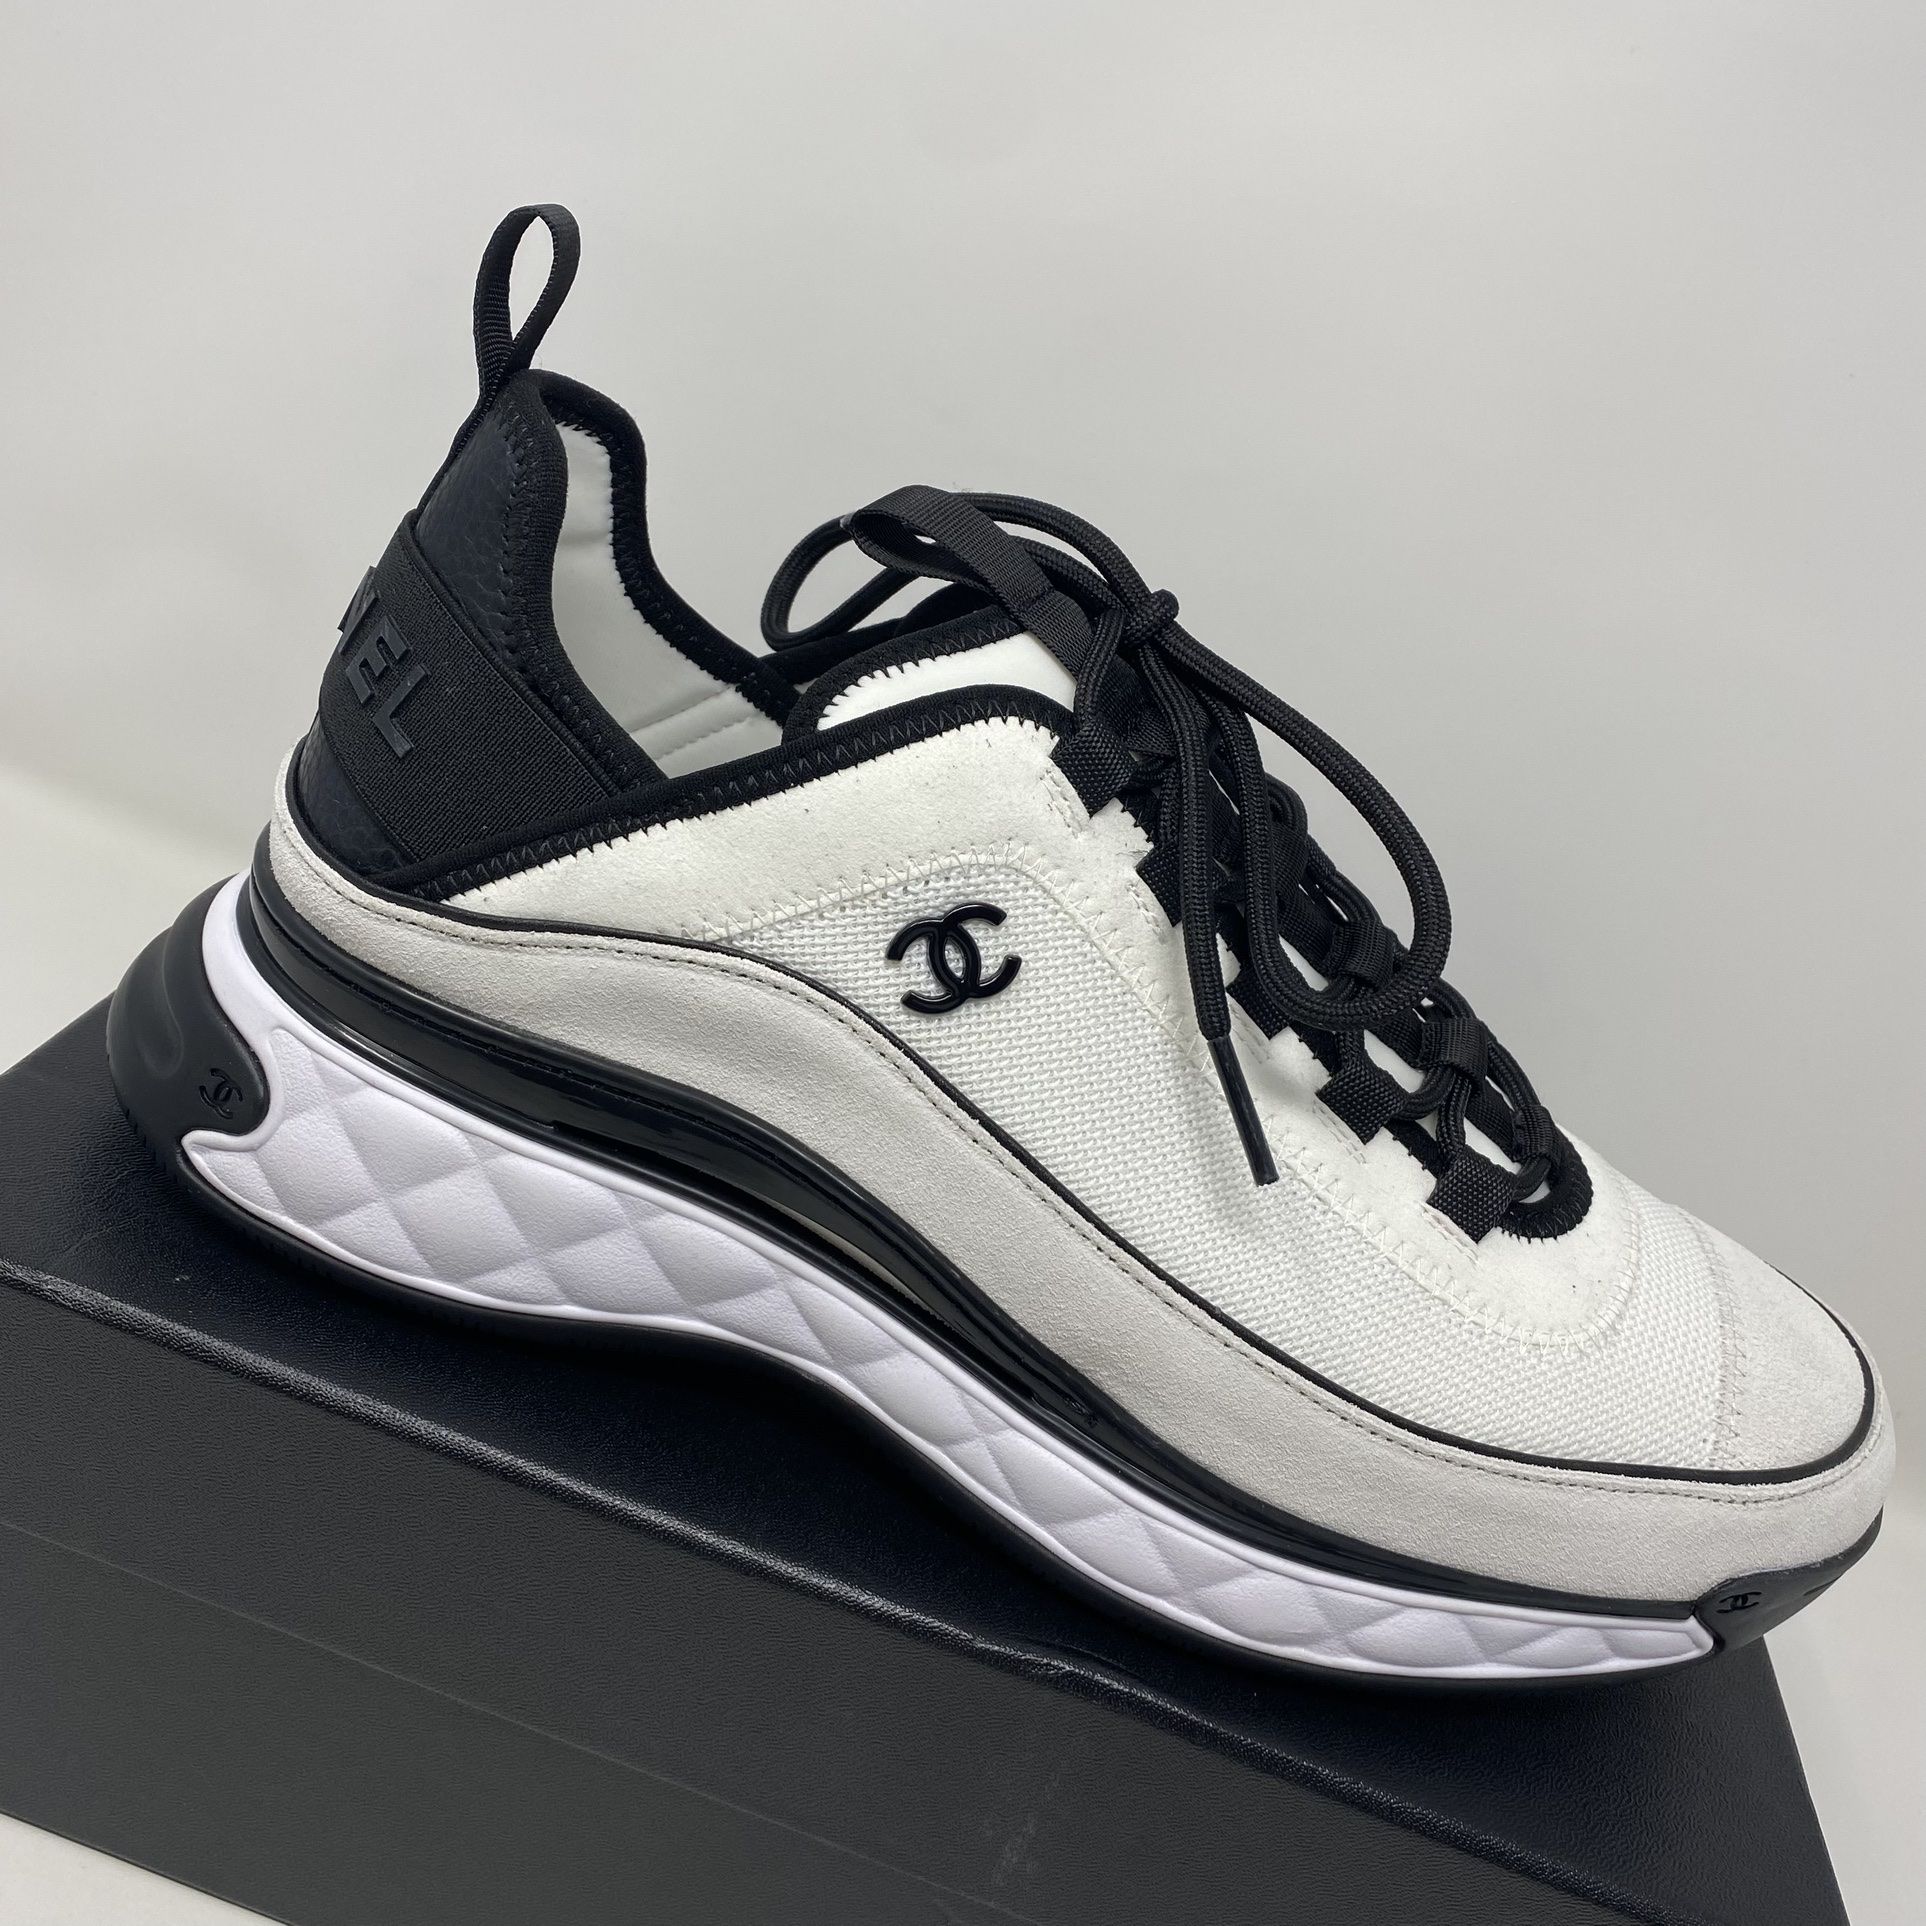 Chanel master copy shoes for Sale in Houston, TX - OfferUp